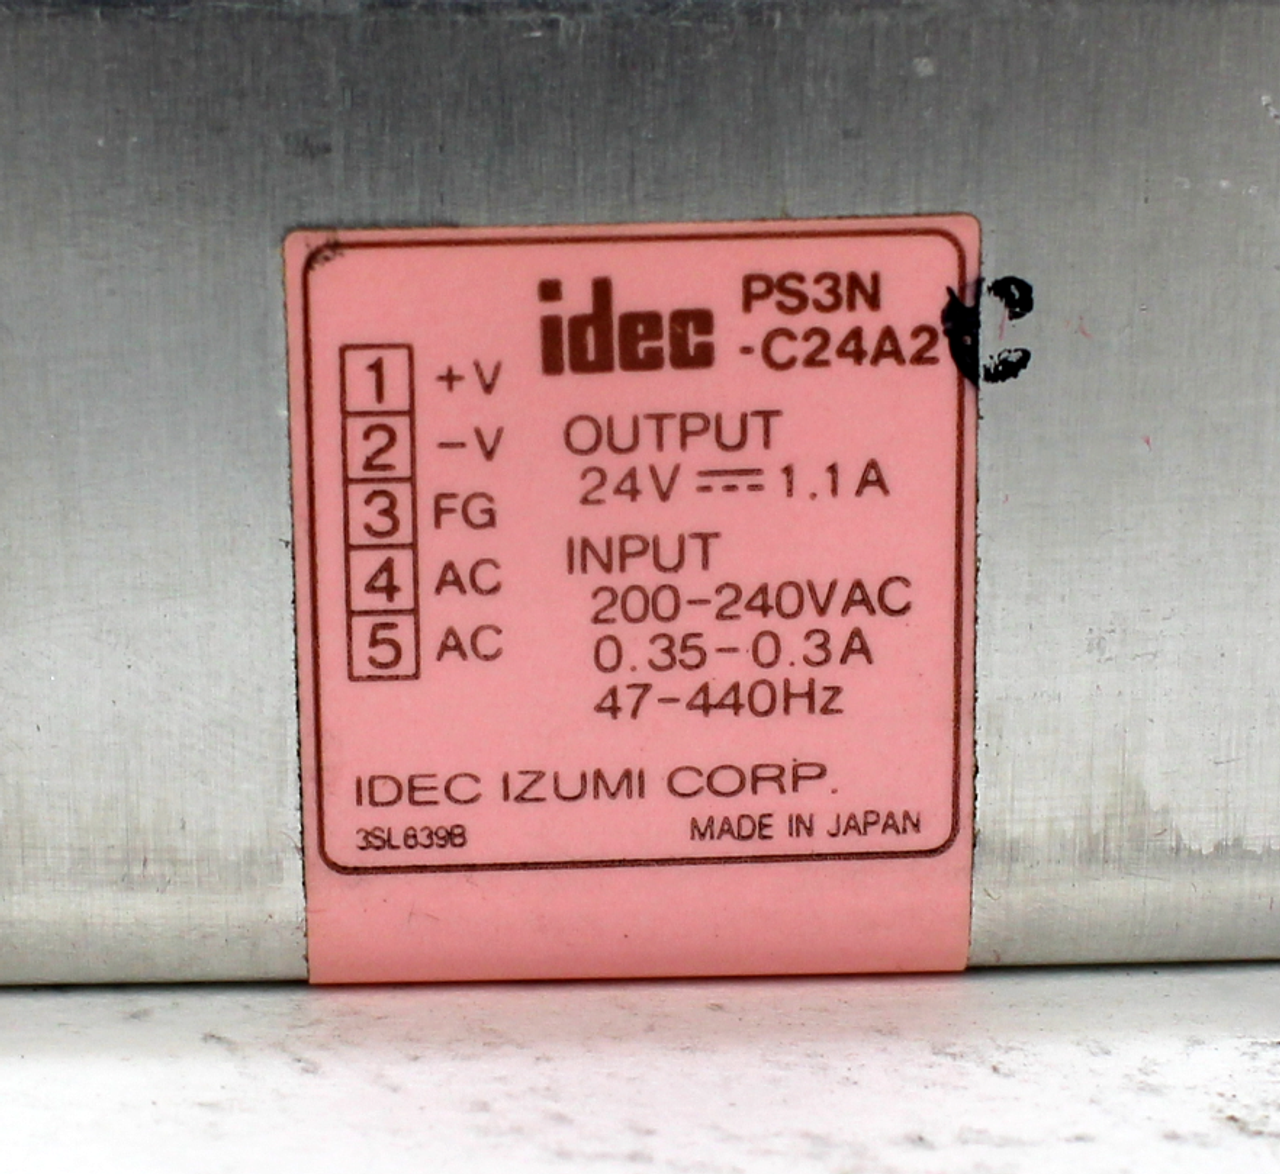 IDEC PS3N-C24A2 Power Supply, 24V, 1.1A Output